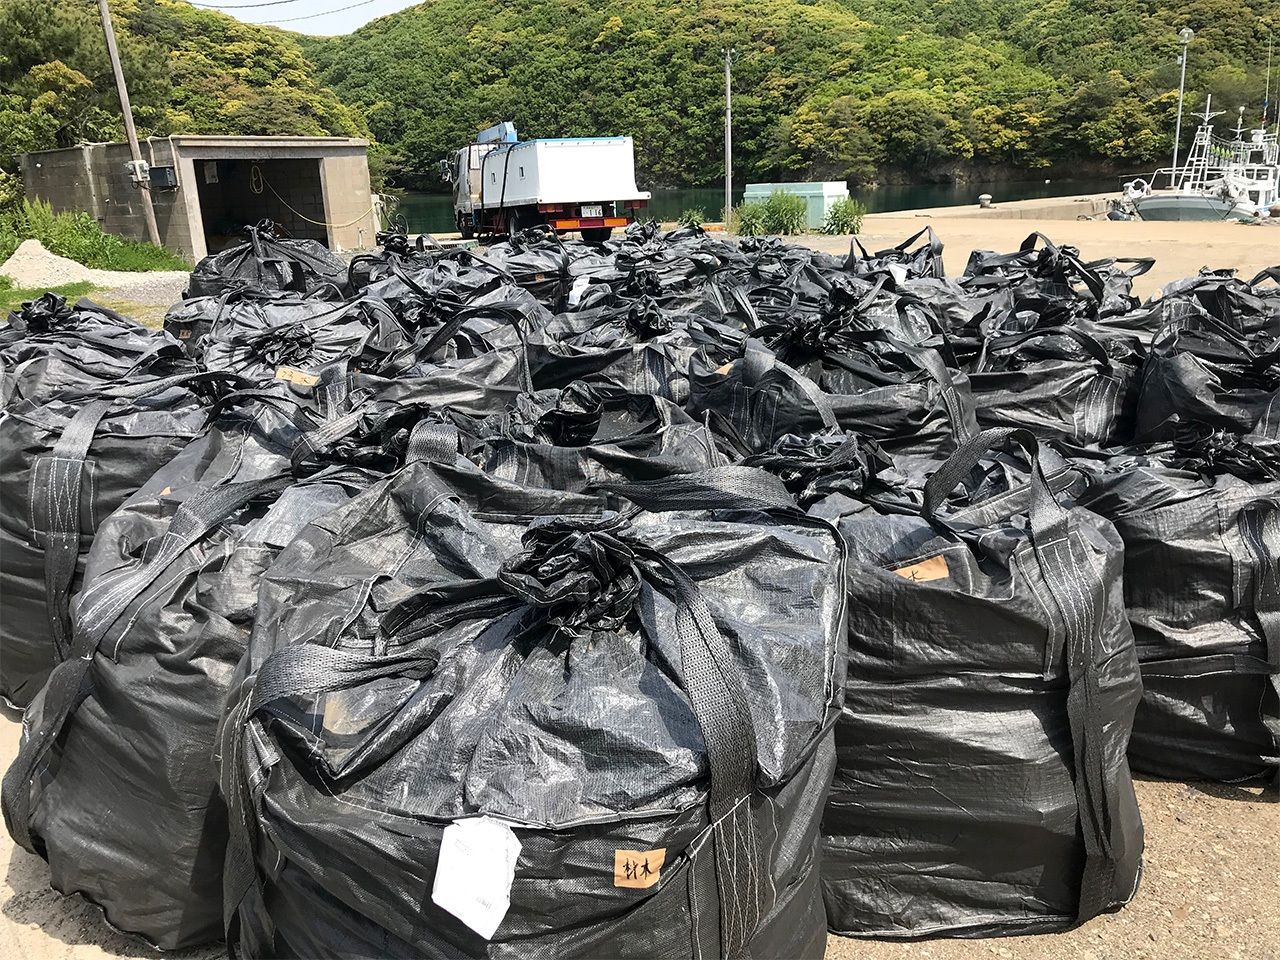 Bags stuffed with marine debris at a Tsushima port.